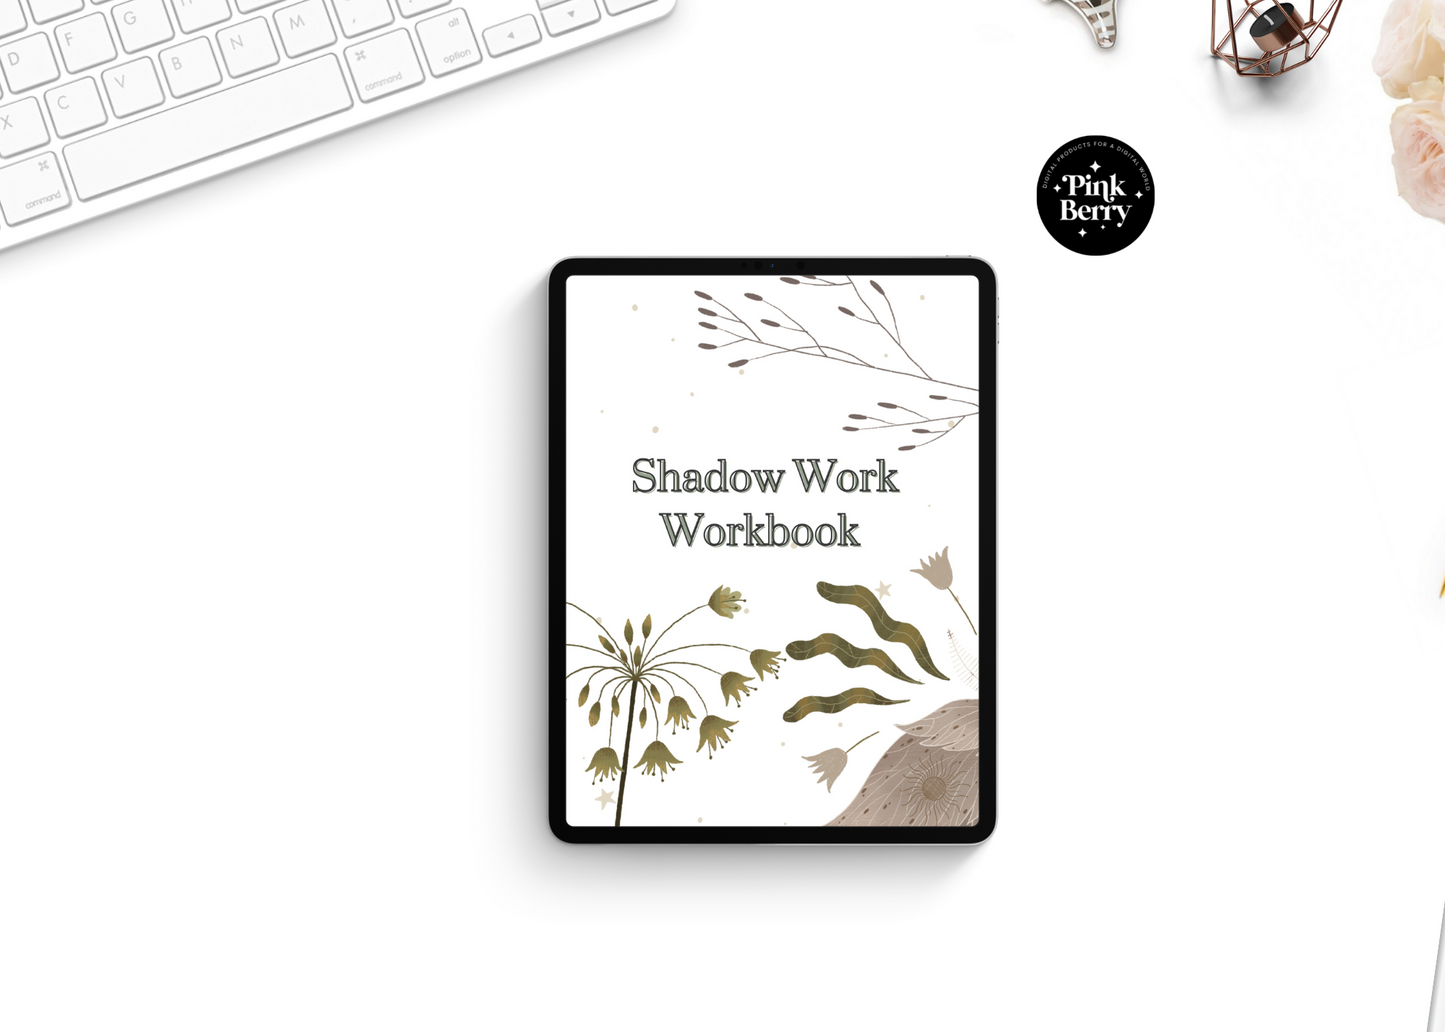 Custom Digital Shadow Work Workbook- For Goodnotes,- Full Customization For Your Business- Done For You Digital Product- PLR Custom Projects